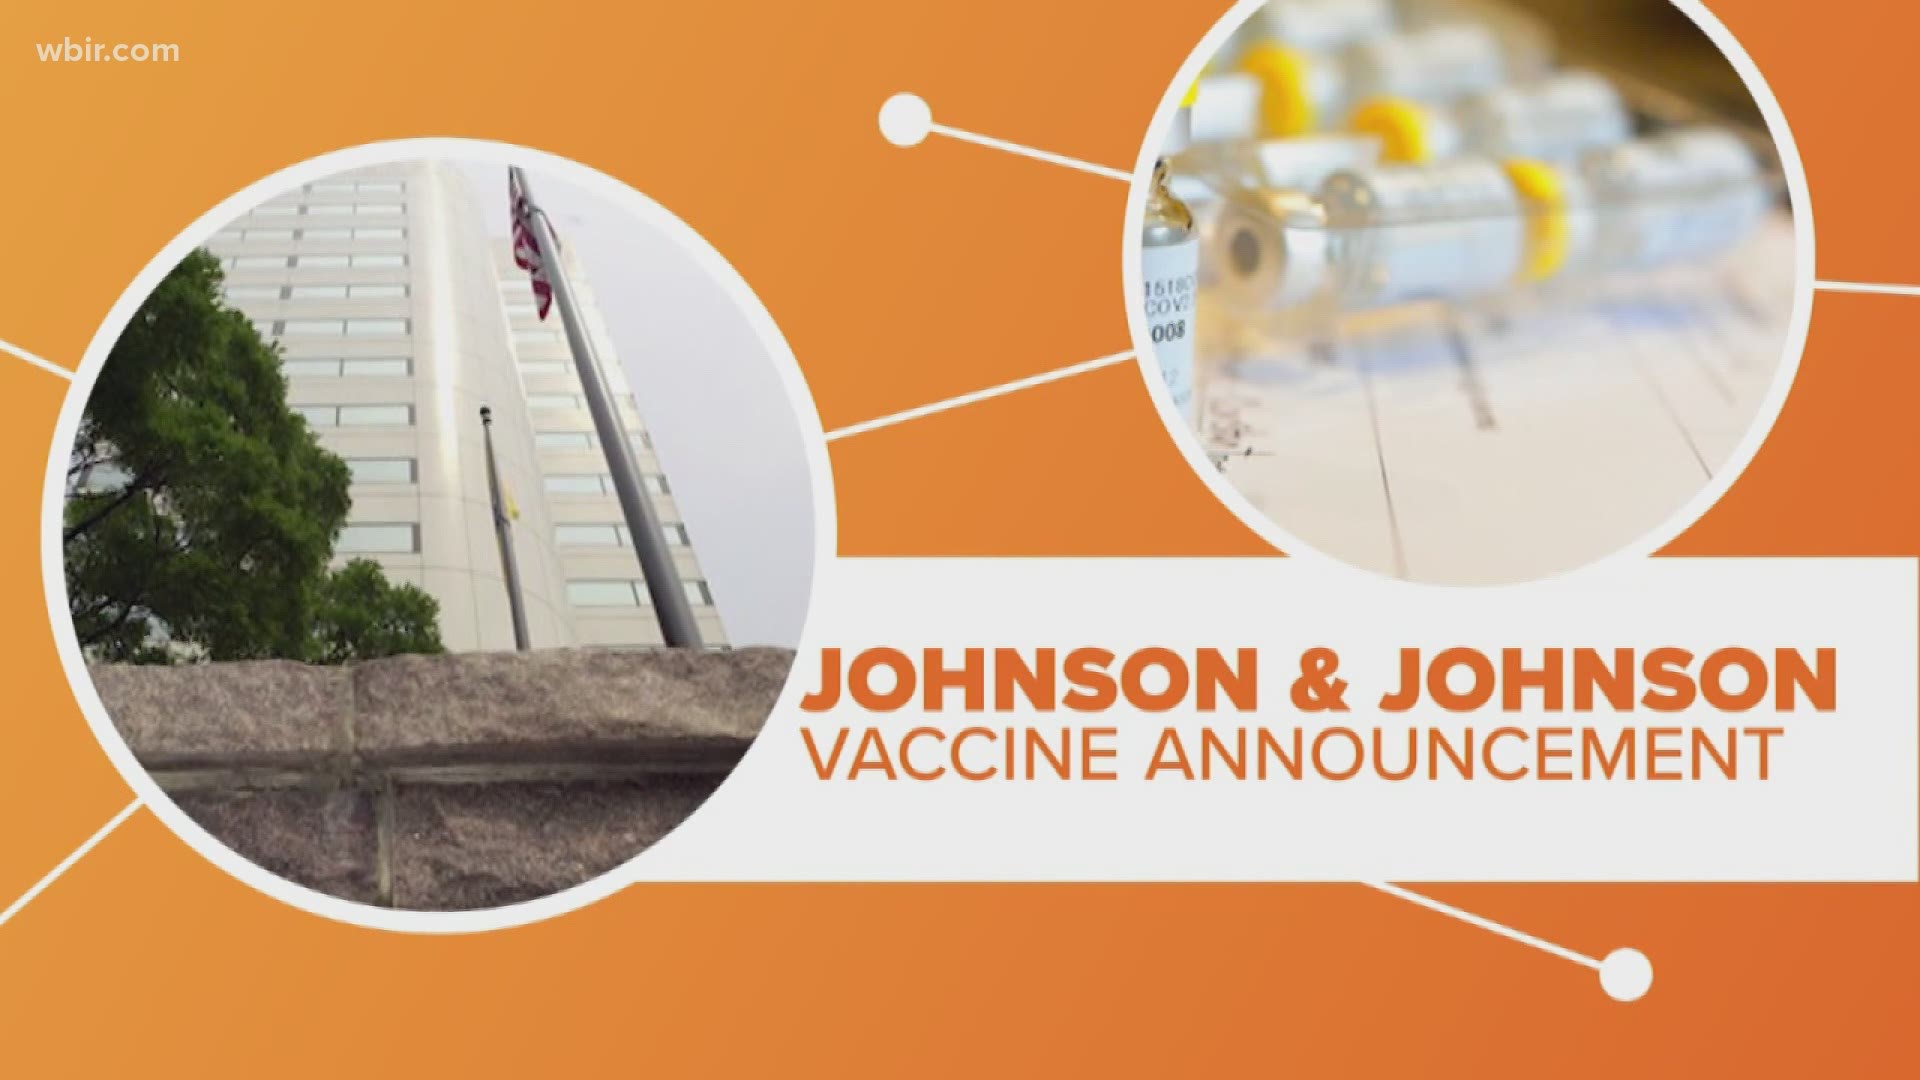 Another company has announced it has a coronavirus vaccine entering phase three trials. So why are a lot of experts excited about Johnson and Johnson's vaccine?